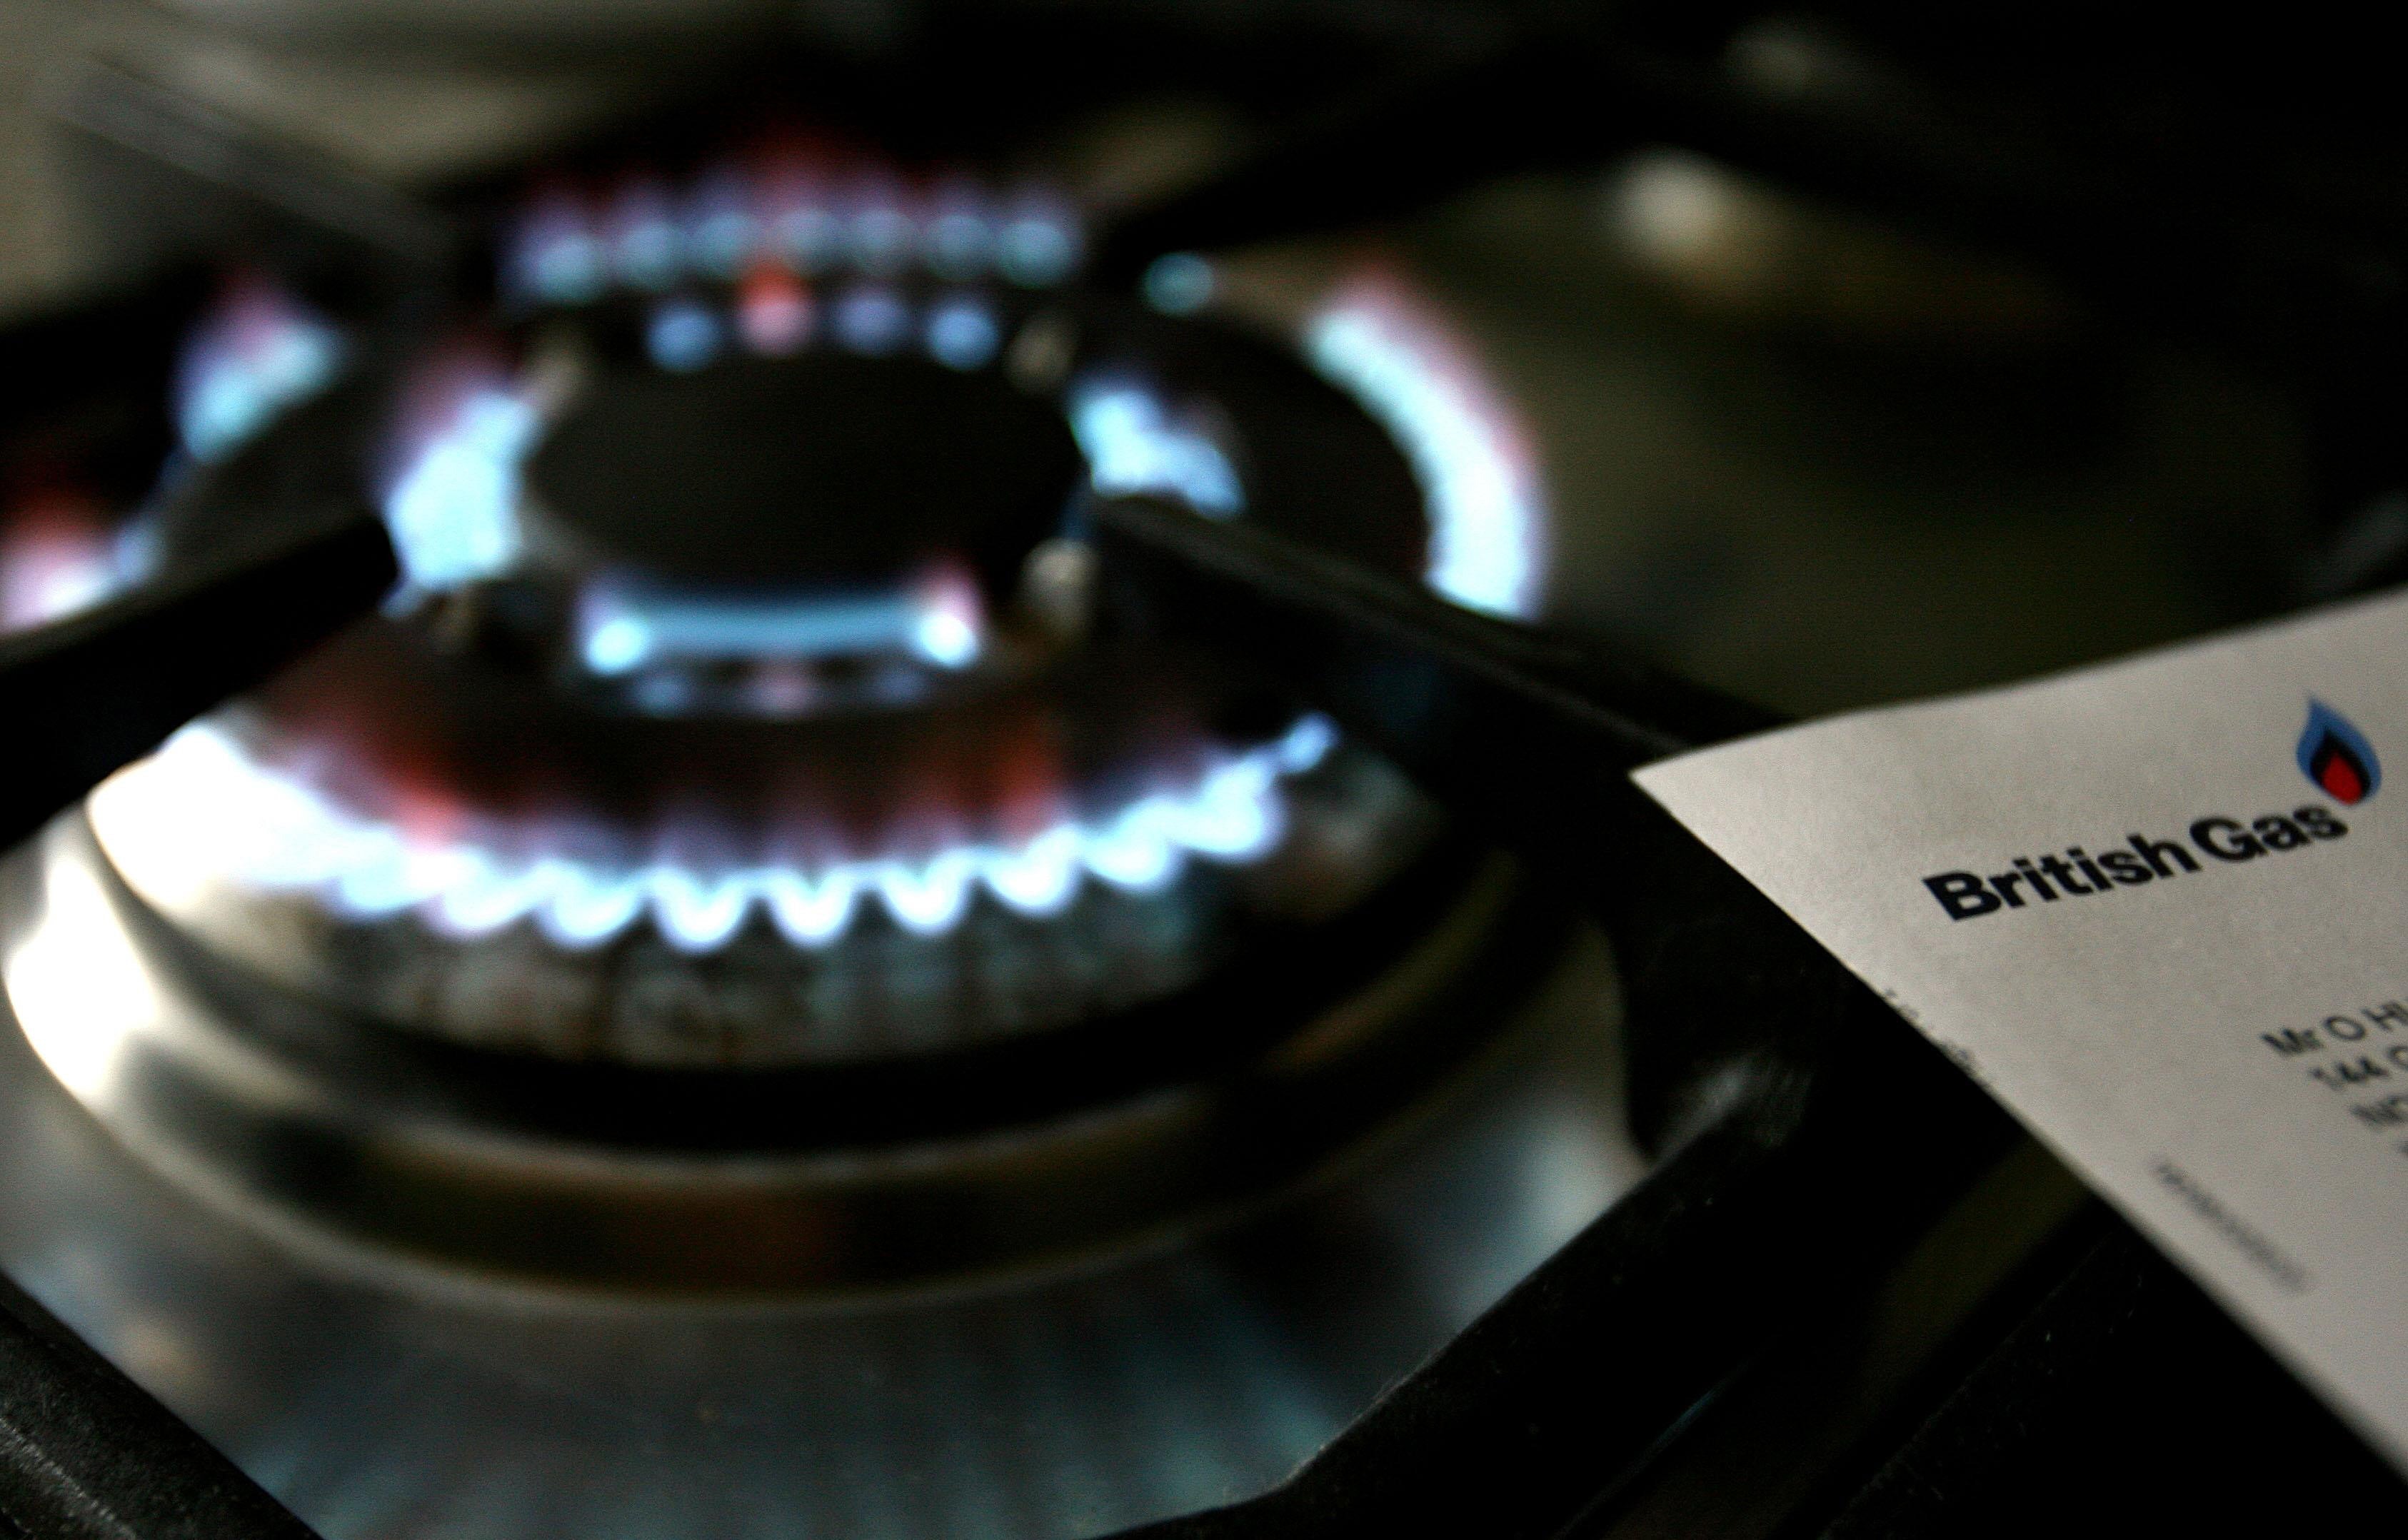 Consumers to pay less per unit of energy under new plans